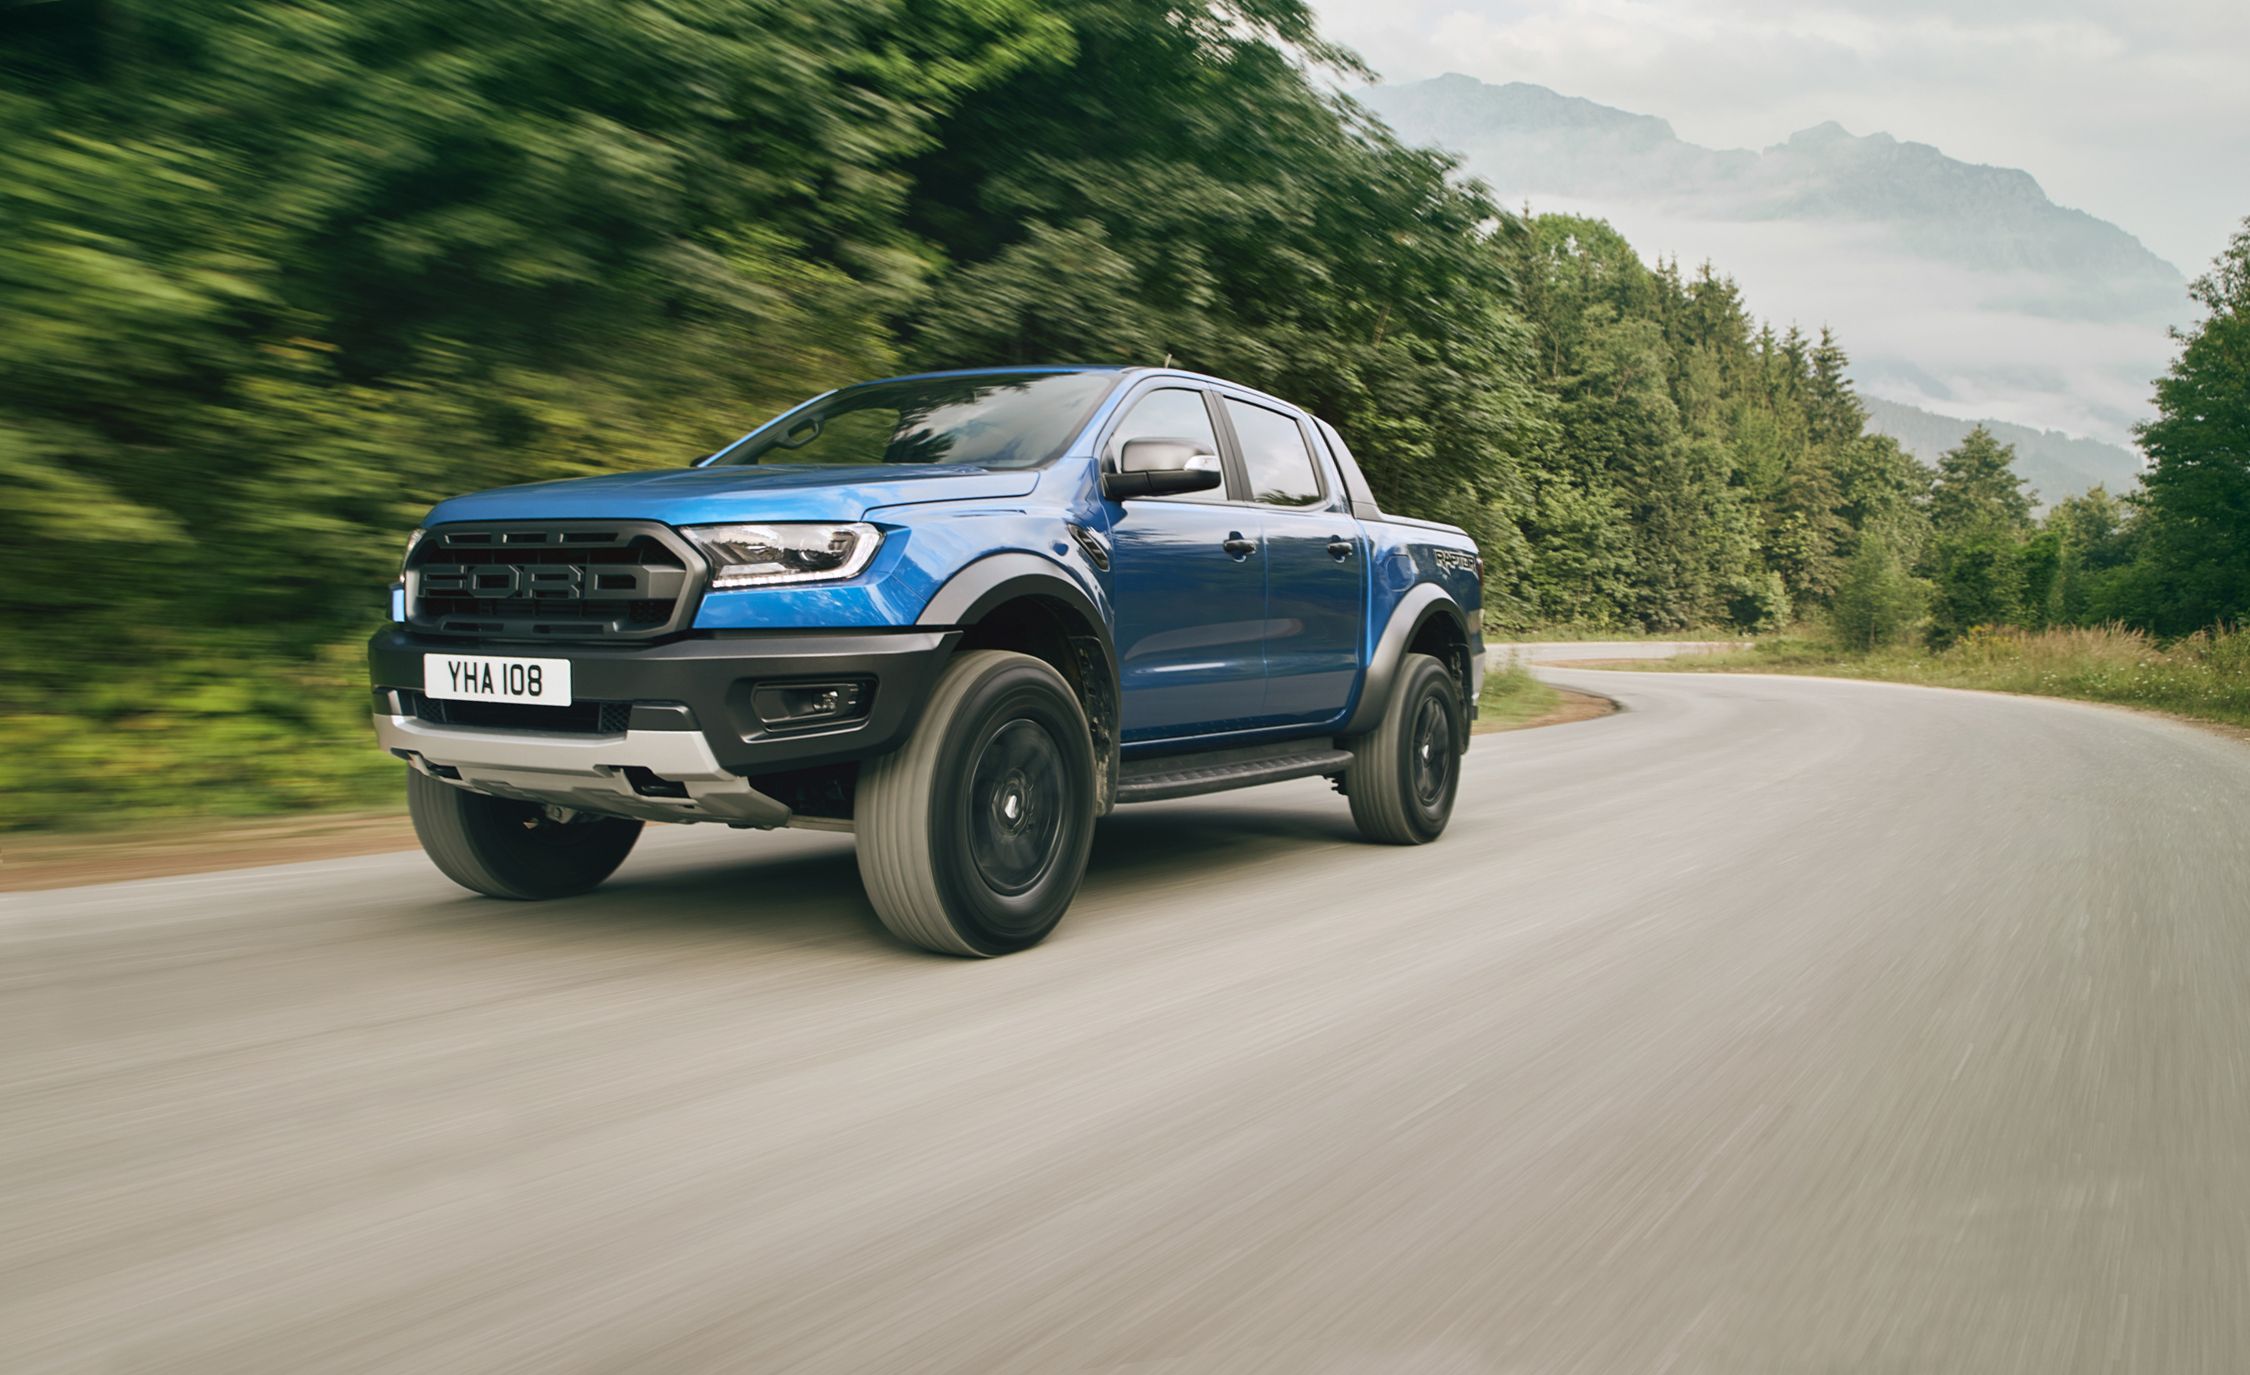 2020 Ford Ranger 4x4 Price Review - New Cars Review